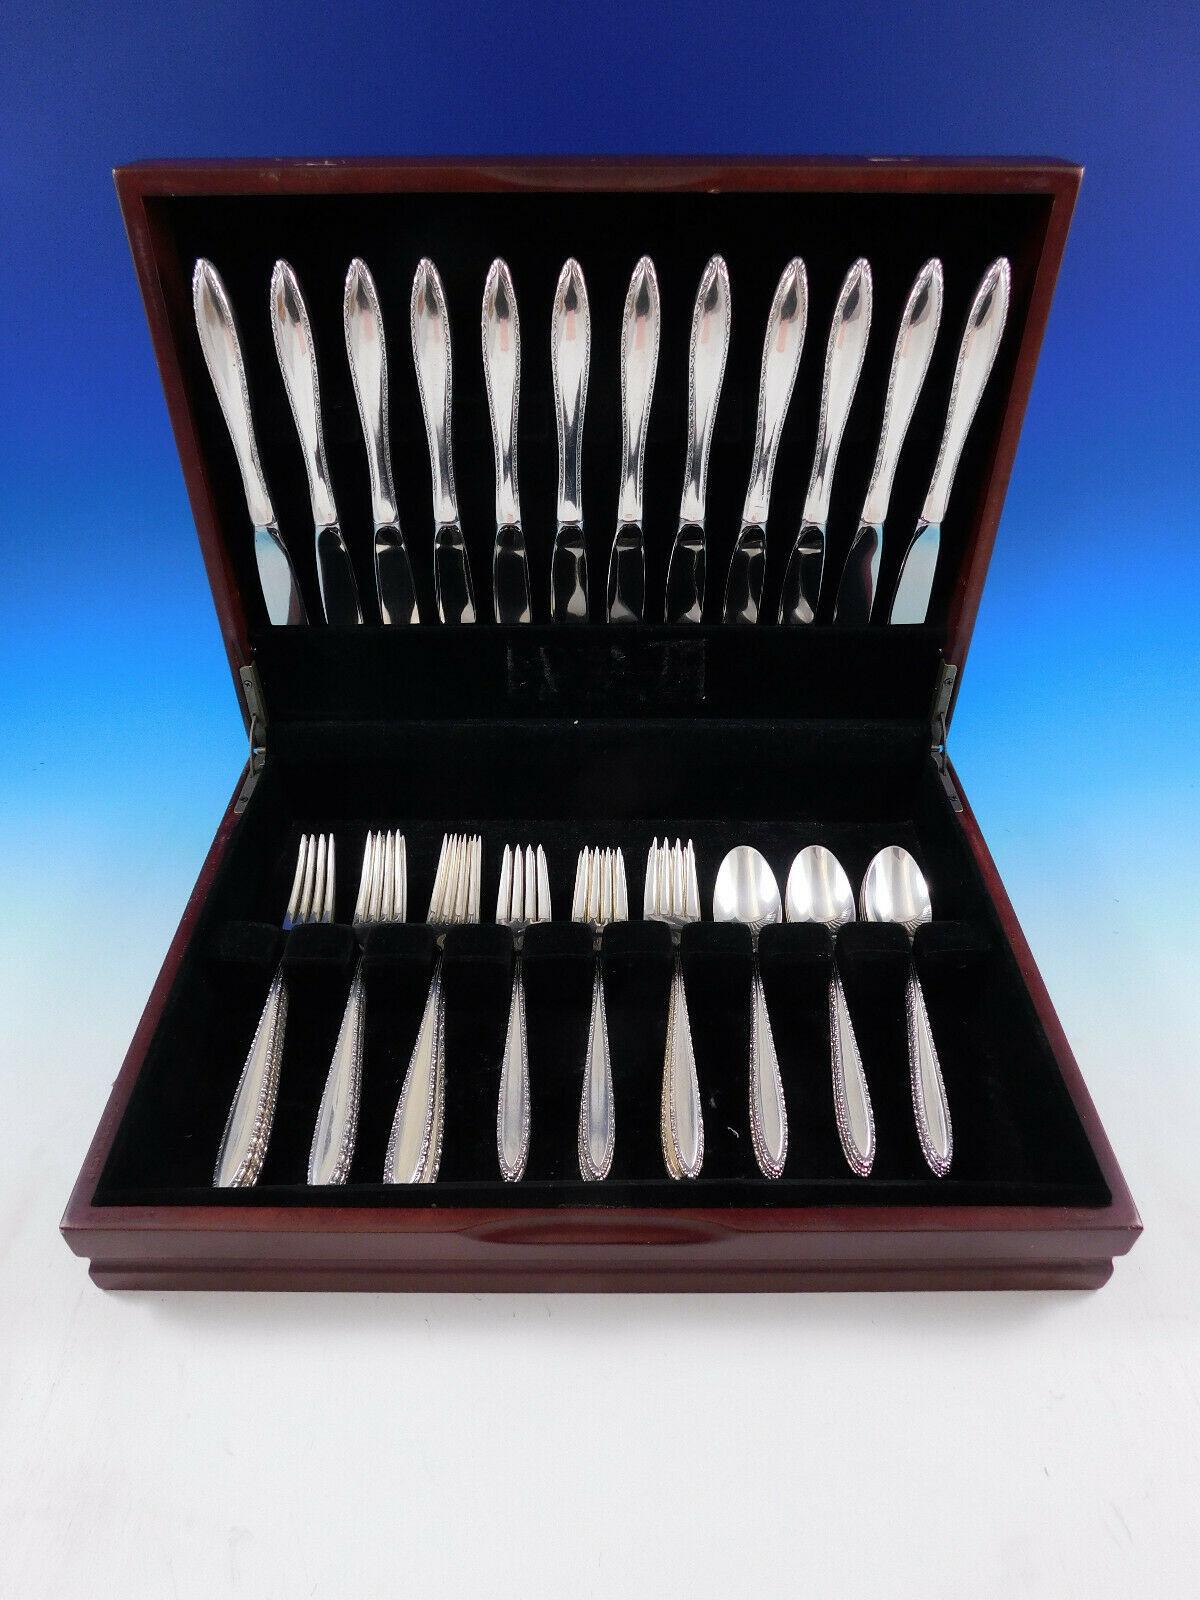 Michele by Wallace, circa 1968, sterling silver flatware set - 48 pieces. This pattern features a modern, slender, pointed handle with a fine lace-like border of design. This set includes:

12 Knives, 9 1/8